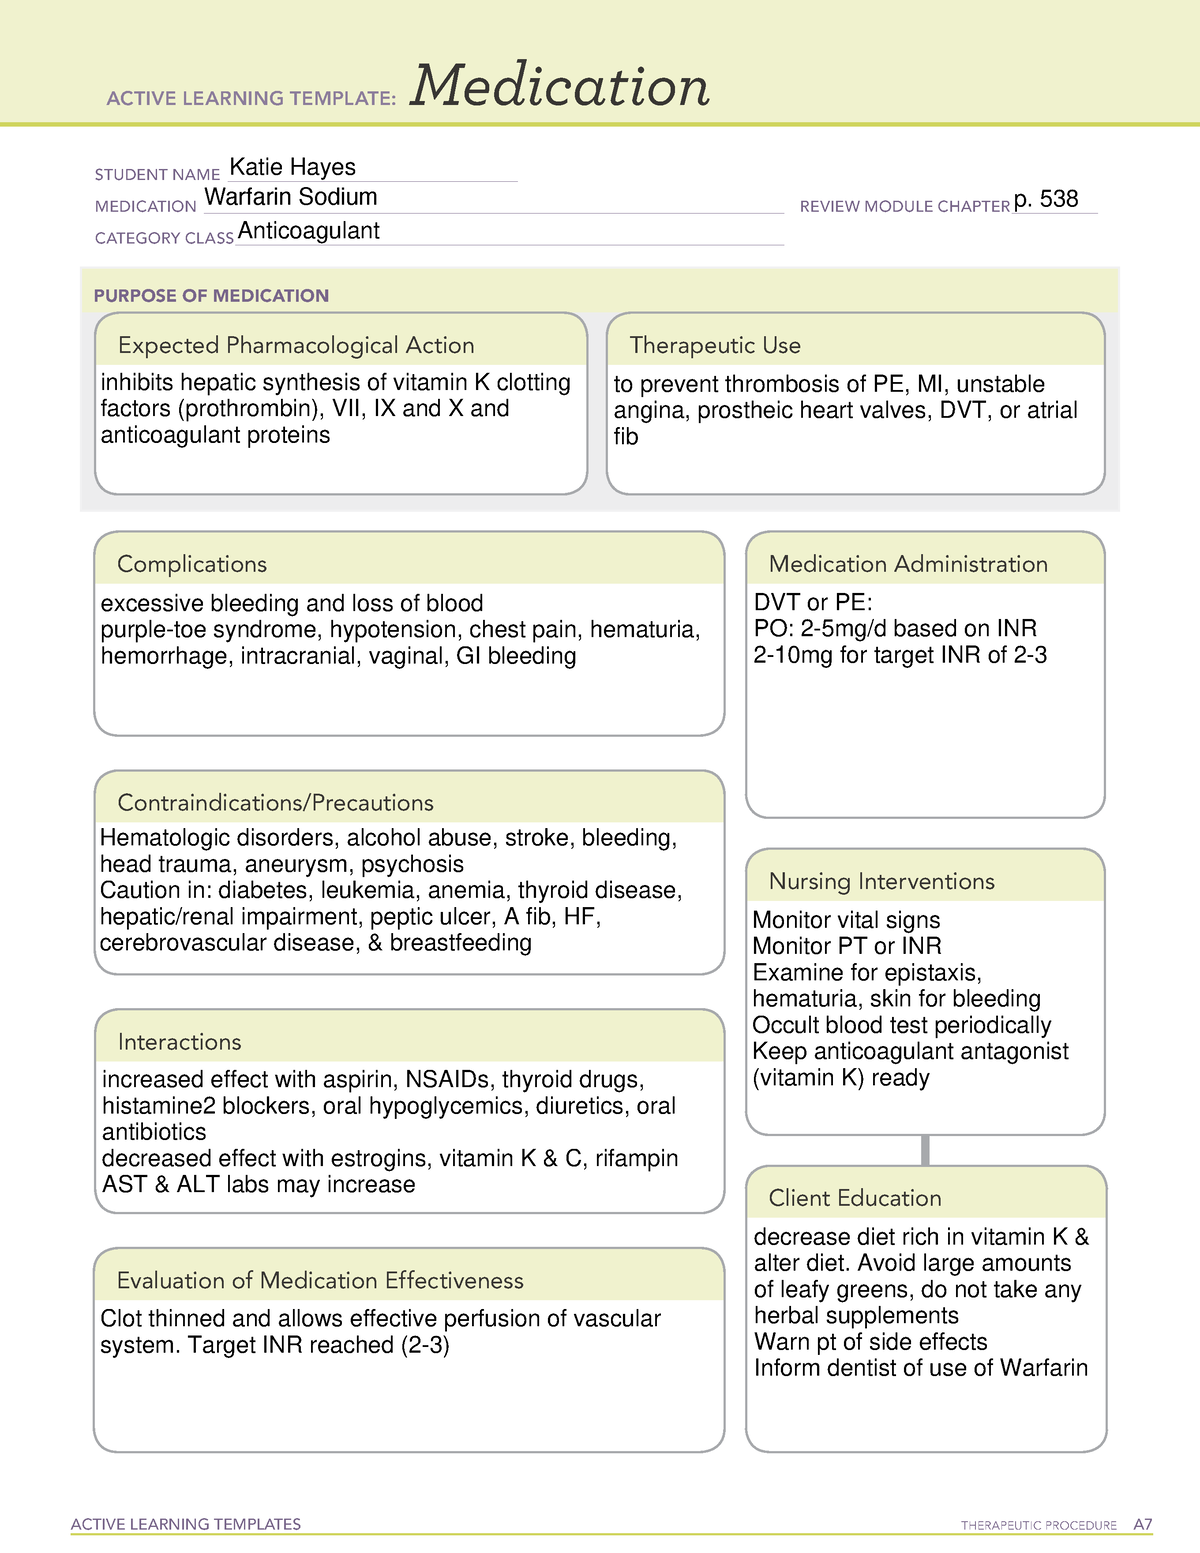 Warfarin Med Card homework ACTIVE LEARNING TEMPLATES THERAPEUTIC